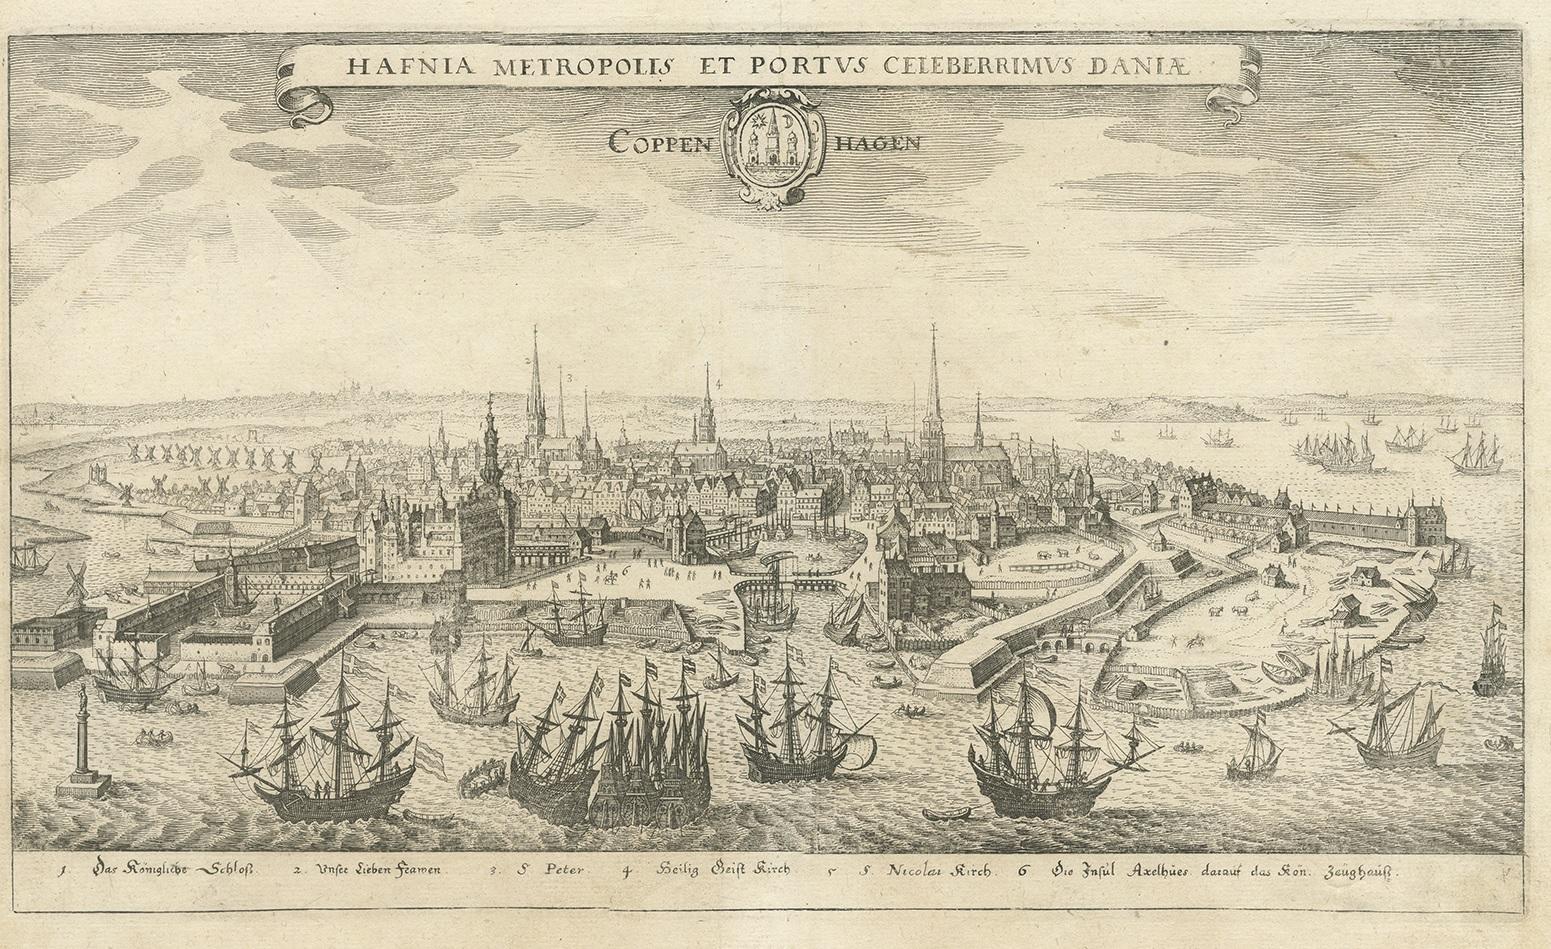 Antique print titled 'Hafnia Metropolis et Portus Celeberrimus Daniae - Coppenhagen'. View of Copenhagen, Denmark. This view is oriented from the harbor and depicts many important buildings of Copenhagen including the Royal Castle and St. Peter's